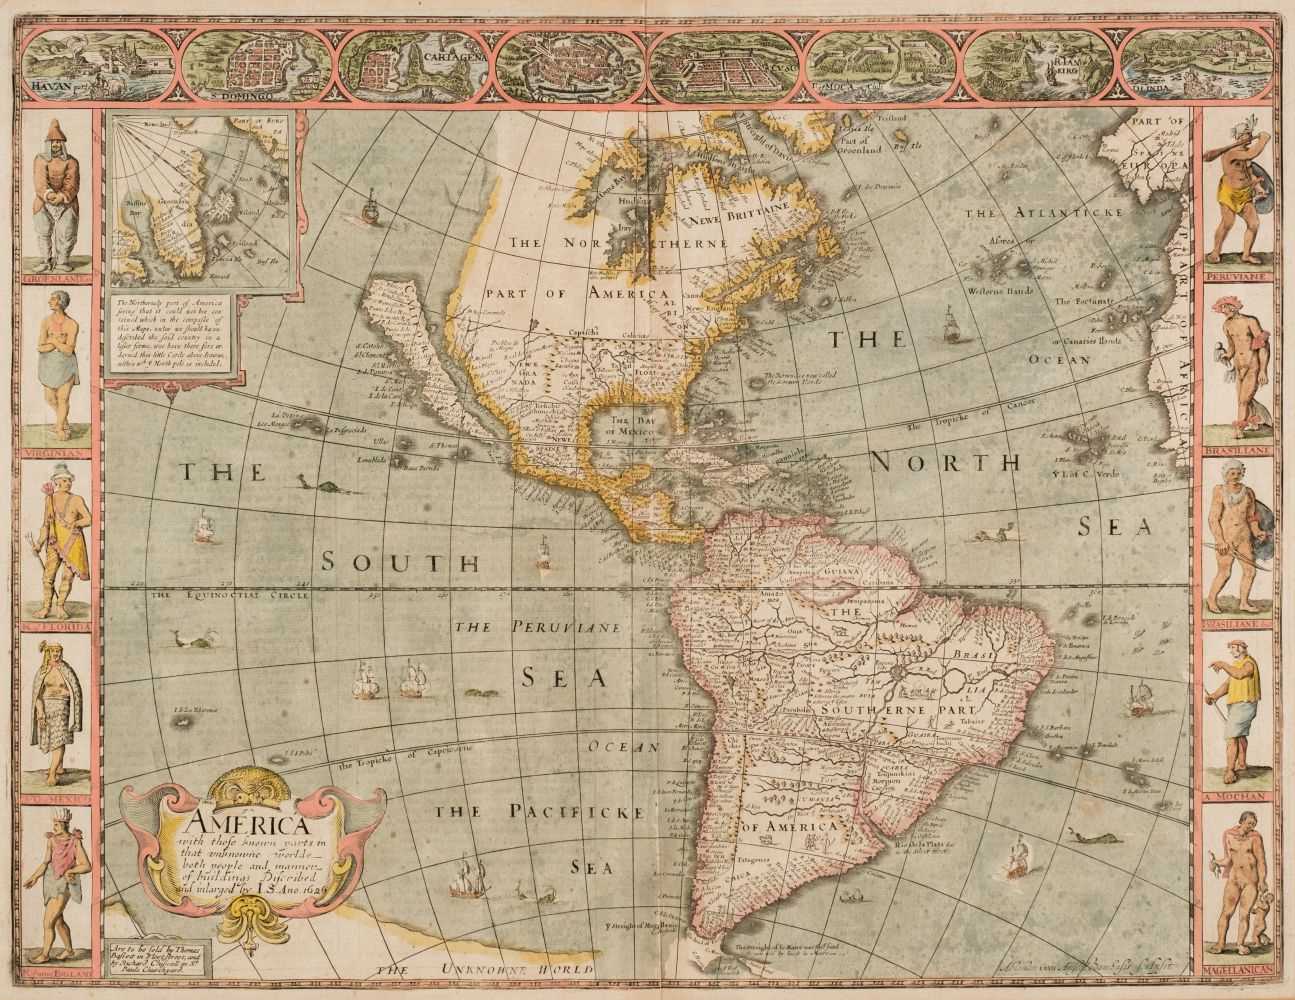 Lot 191 - The Americas. Speed (John), America with those known parts..., 1676